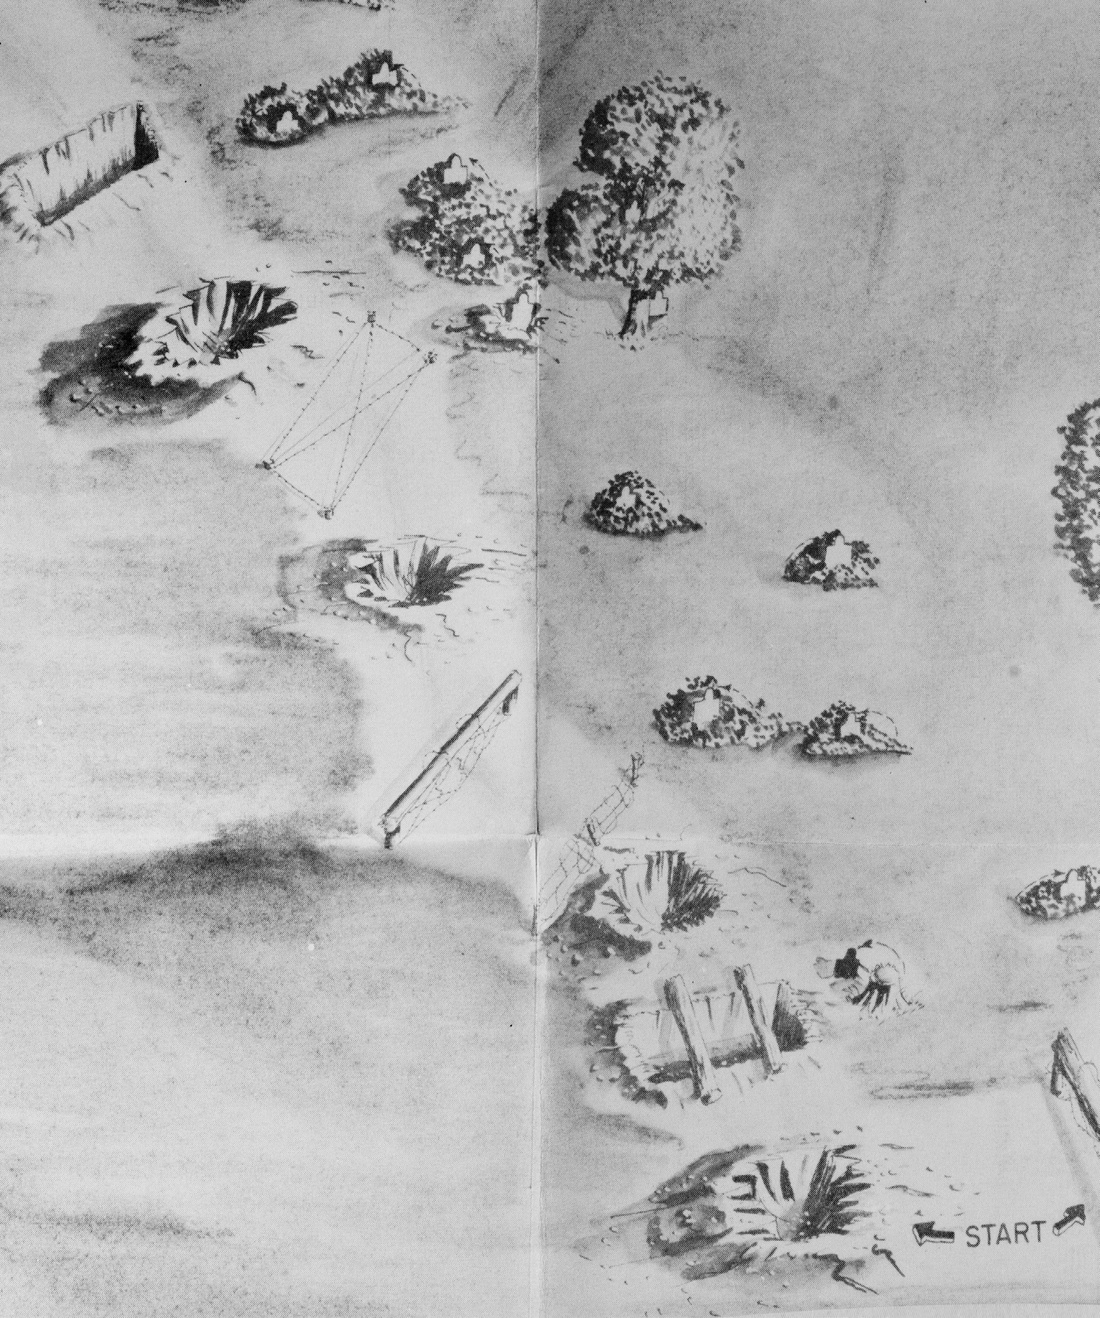 Detail of “Close Combat Course”; Sketch to Accompany Inclosure 2 in 353.01/61–GnGTC (2-4-43); H.Q. A.G.F. to all Commanding Generals (February, 4 1943) “Subject: Special Battle Courses”; Training Directives; Background Files: “Military Training in WWII” 1939-1945; Record Group 319, National Archives Building, College Park, M.D.